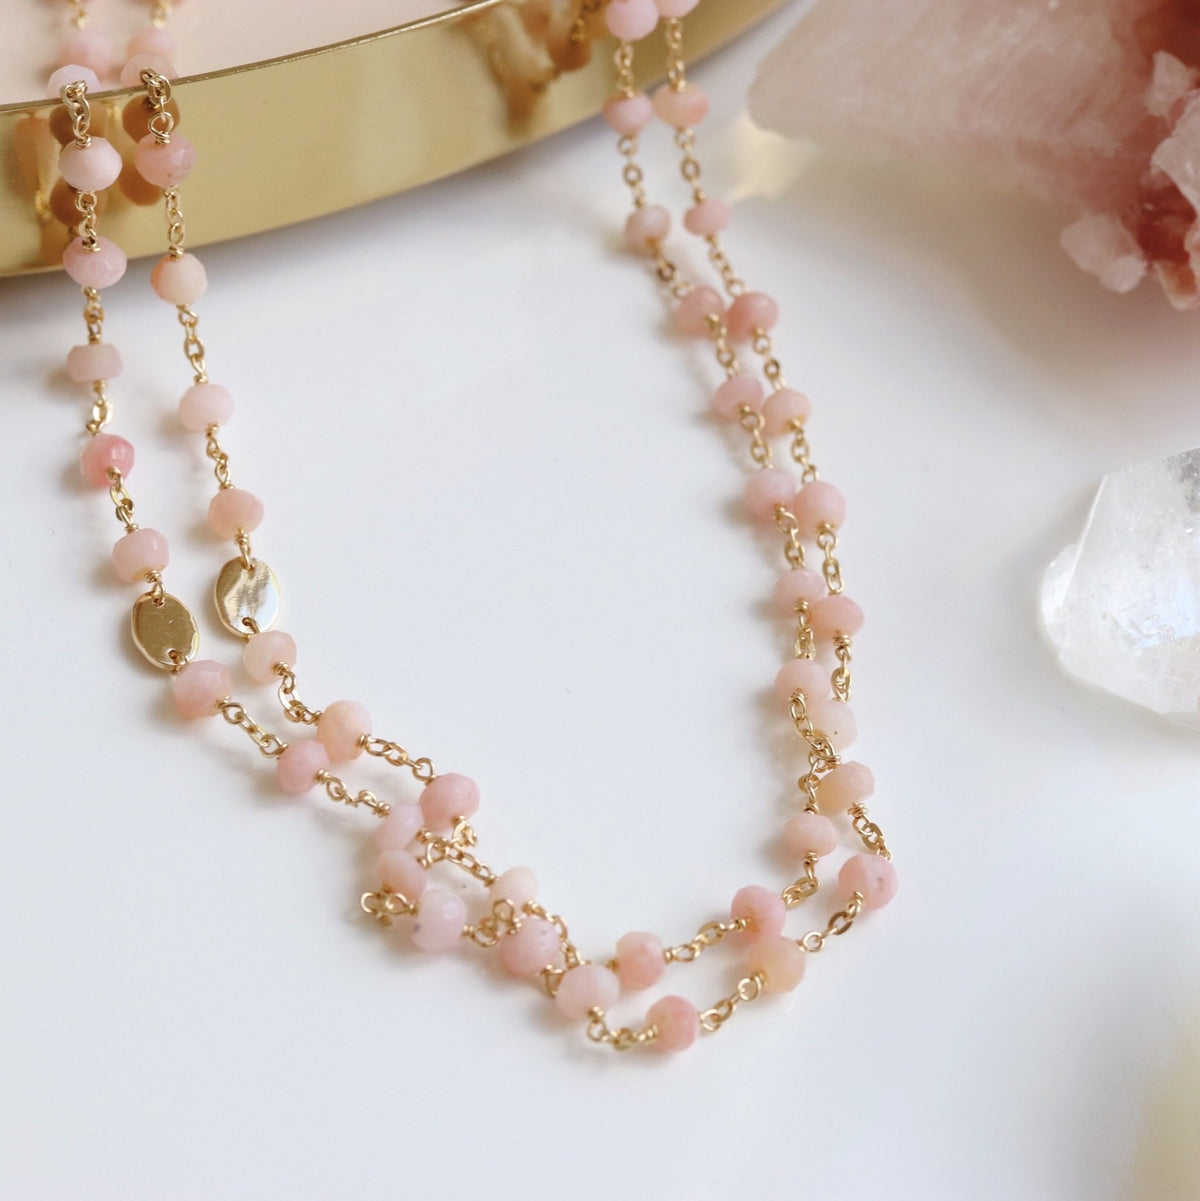 ICONIC LONG BEADED NECKLACE - PINK OPAL &amp; GOLD 34&quot; - SO PRETTY CARA COTTER